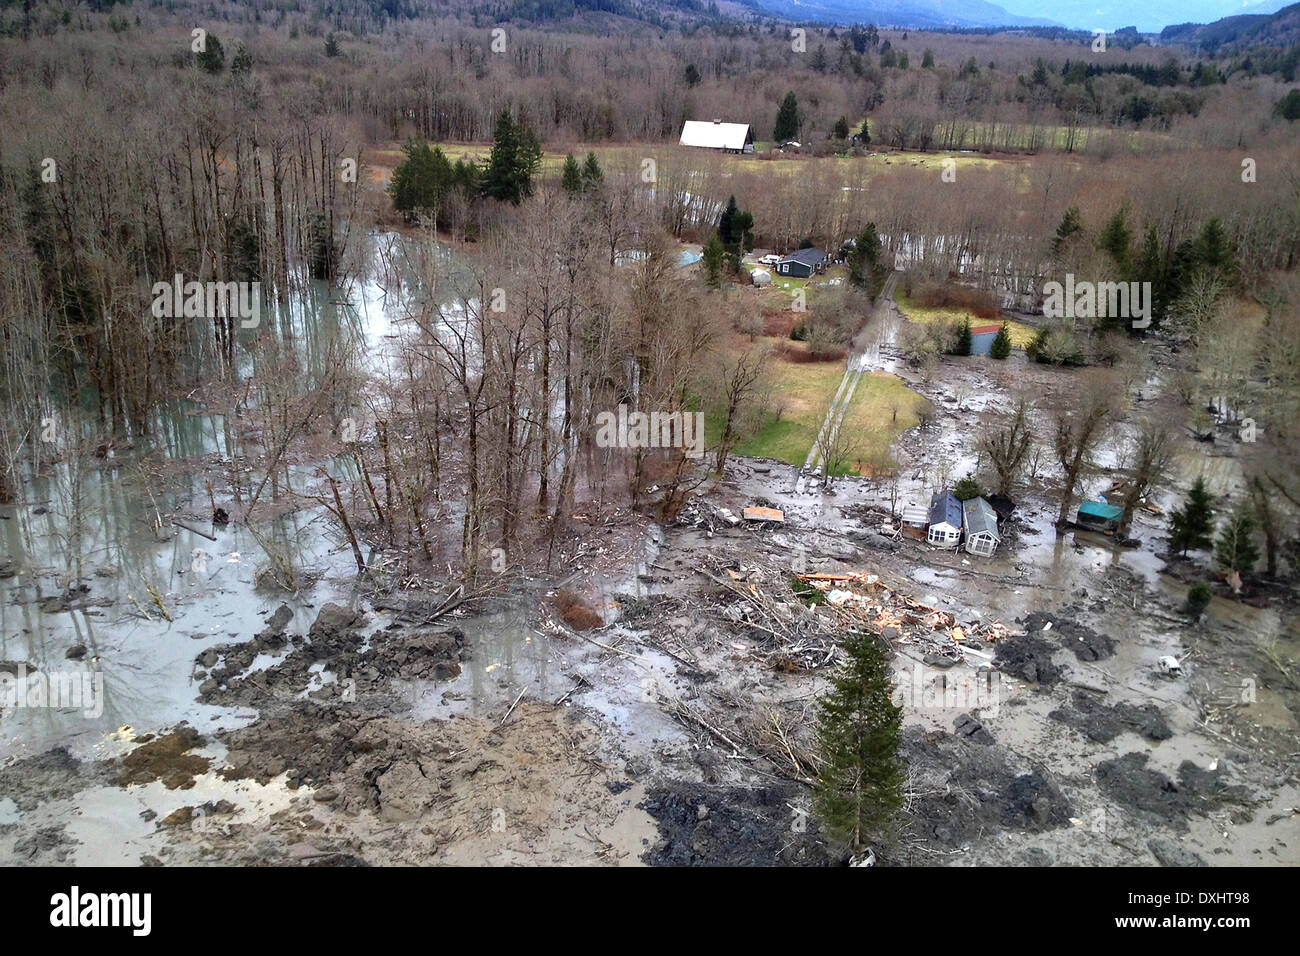 Aerial view of the landslide that blocked the Stillaguamish River burying State Route 530 and causing a massive mudslide killing at least fourteen people and destroying a small riverside village in northwestern Washington state March 22, 2014 in Oso, Washington. Officials report that 176 people are still missing and feared dead. Stock Photo